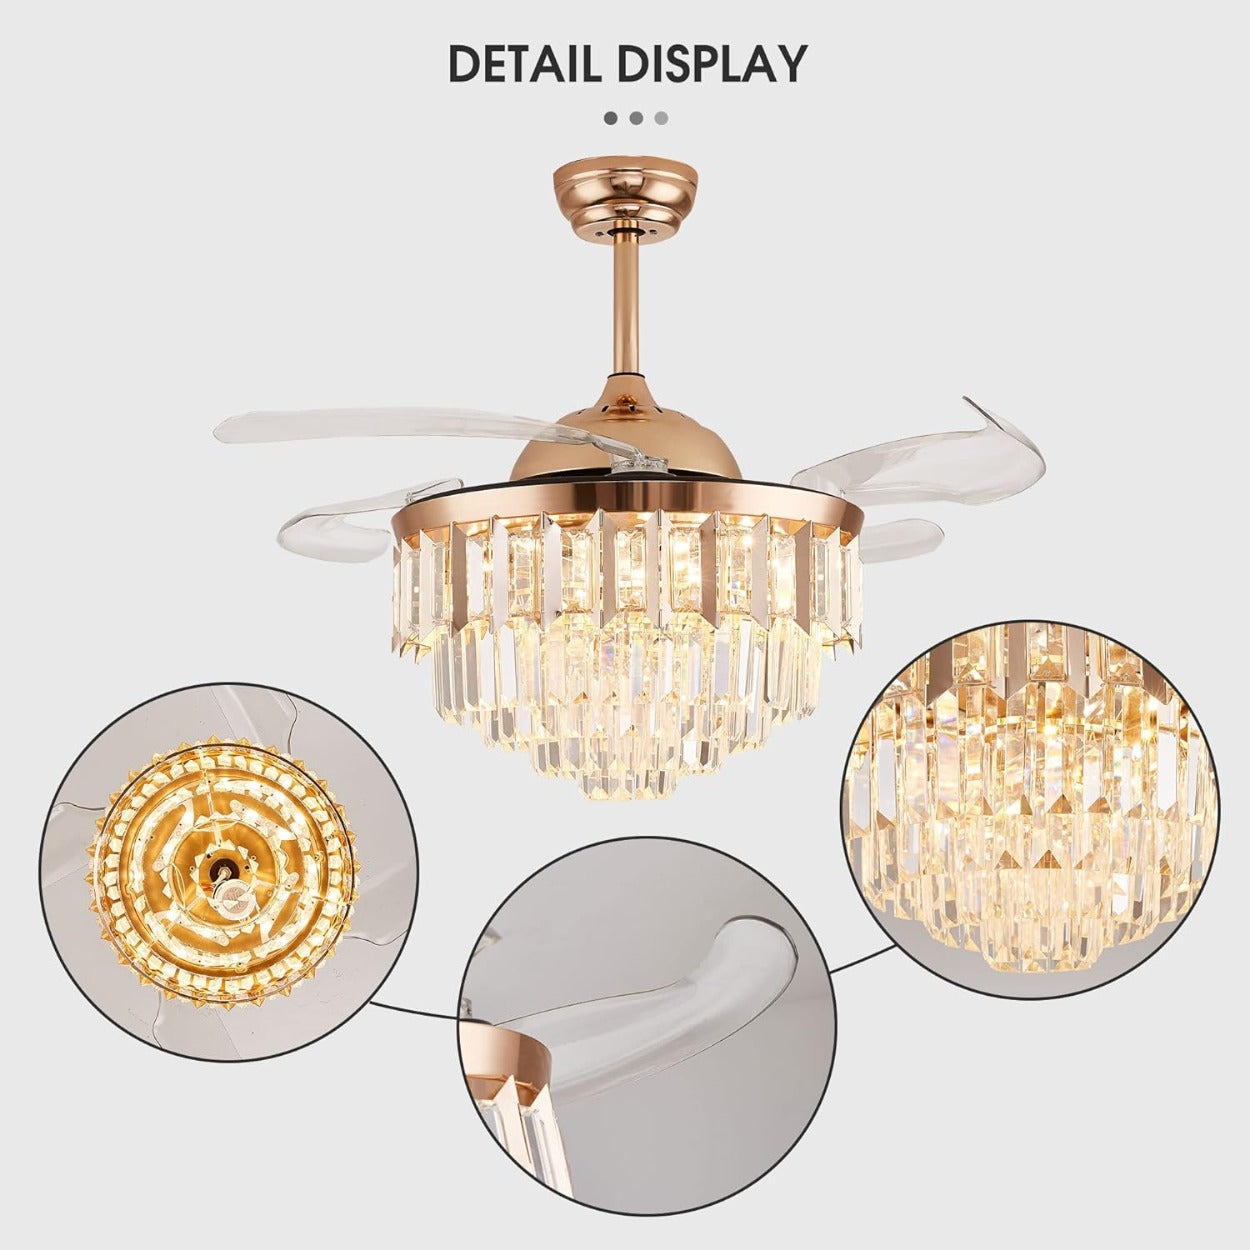 ANKUR BREEZO CRYSTAL LED CEILING FAN WITH CRYSTAL CHANDELIER AND